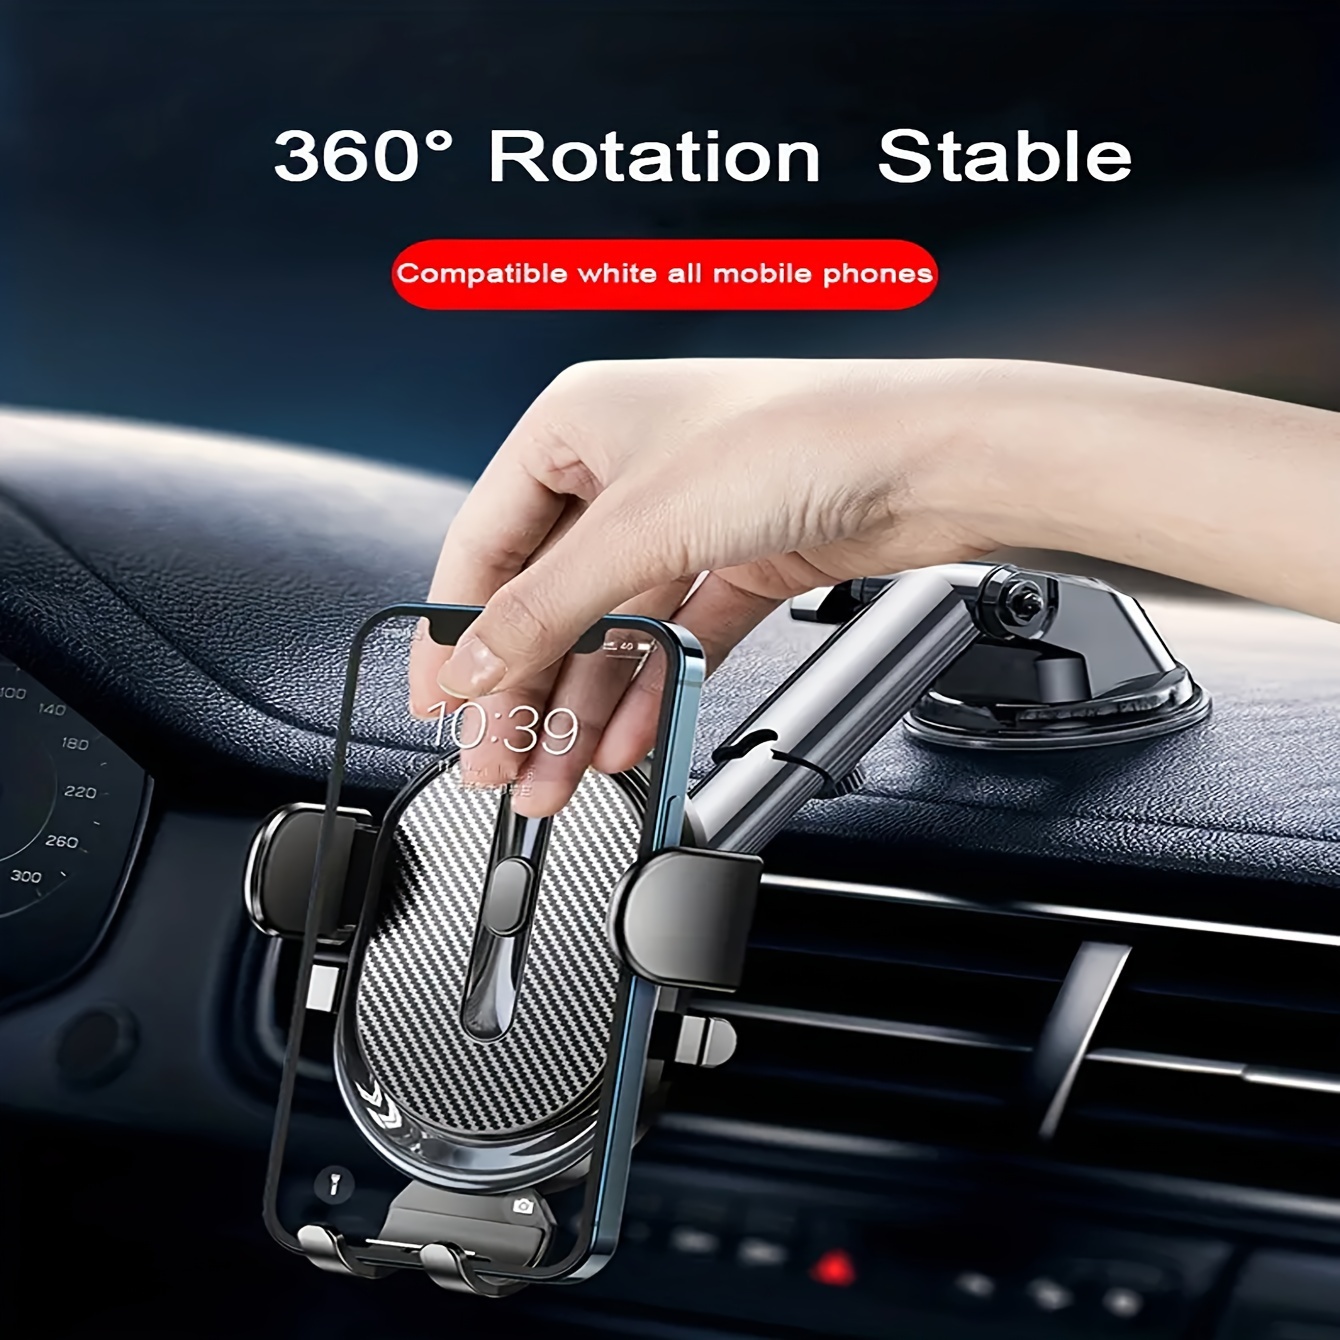 

1pc, Universal Car Phone Mount Holder, Suction Cup Dashboard Phone Stand, 360° Rotation, Adjustable, Extendable, Compatible With All Mobile Phones, Vehicle Interior Accessory